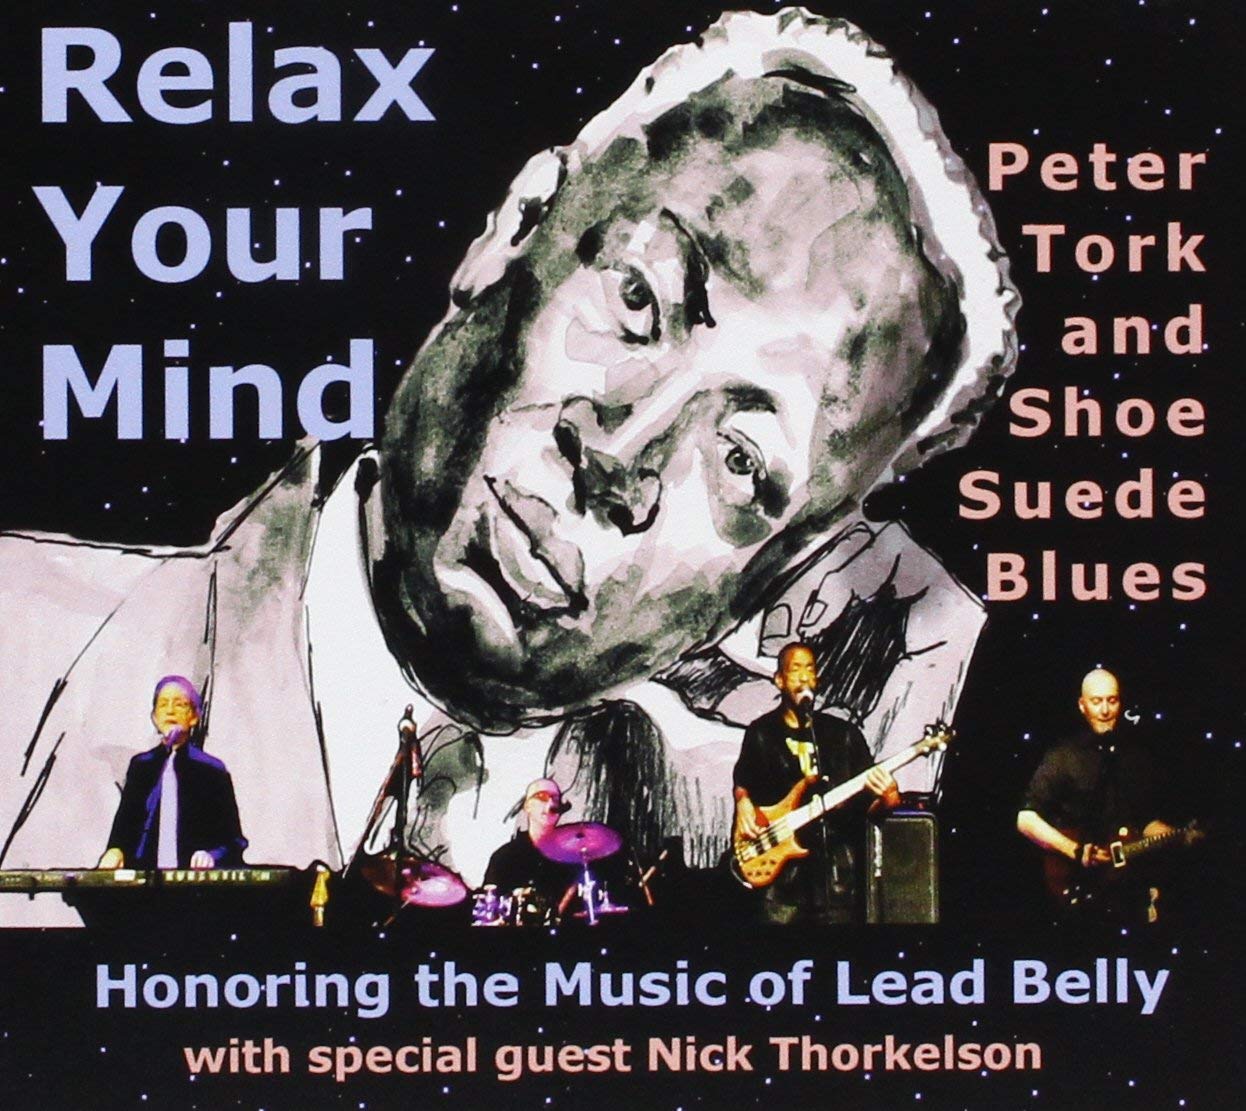 PETER TORK AND SHOE SUEDE BLUES / RELAX YOUR MIND